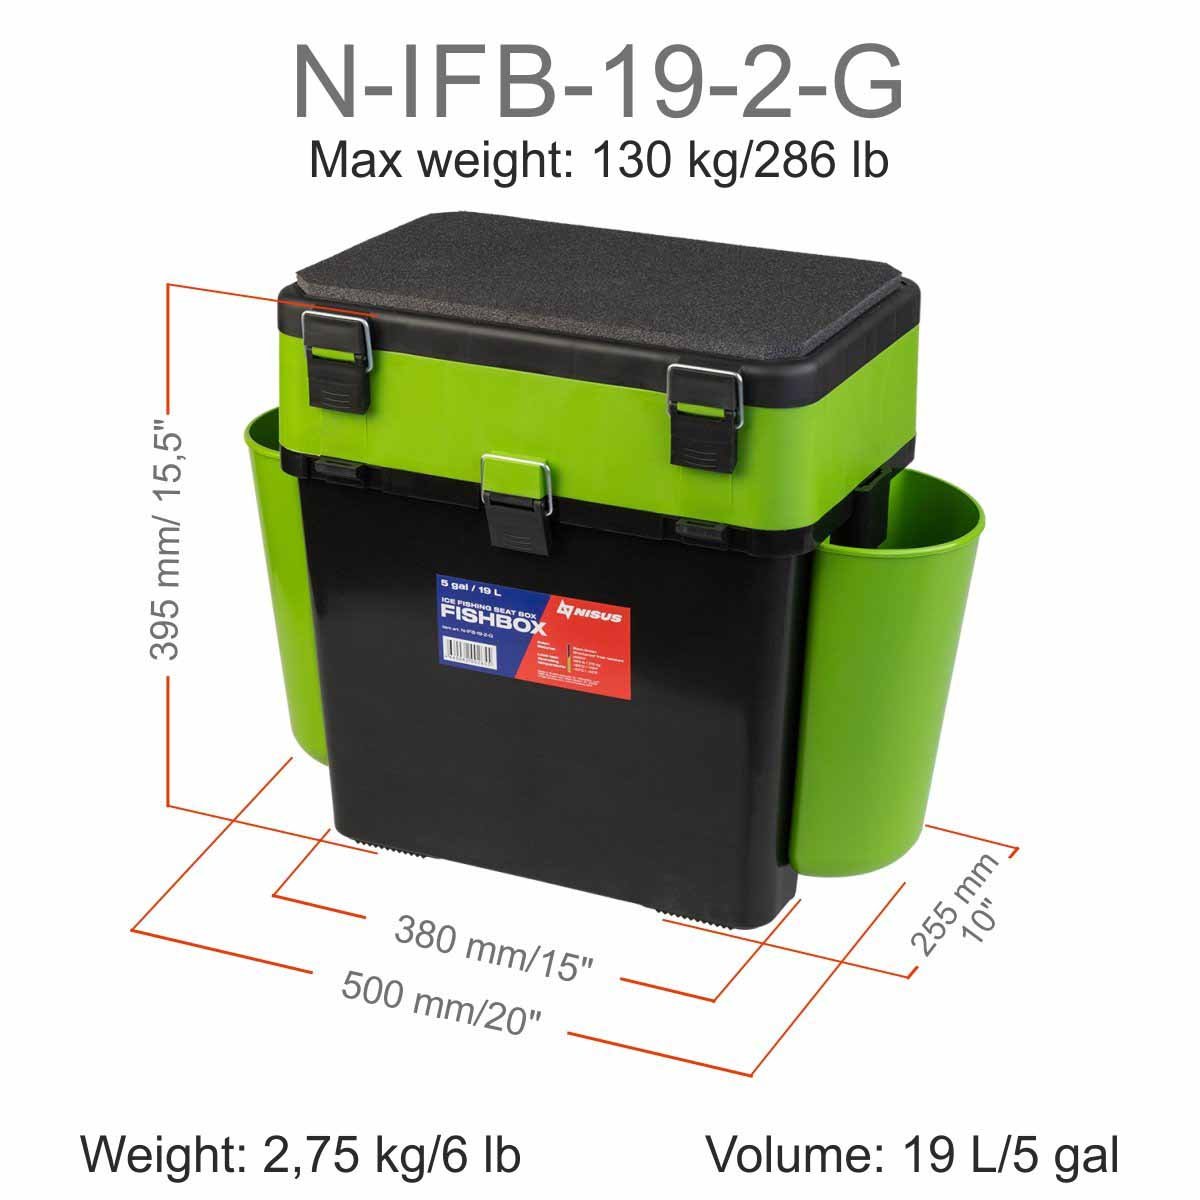 FishBox Large 5 gal Box for Ice Fishing with Seat could carry up to 286 pounds, it is 15.5 inches high, 16 inches long and 10 inches wide, weighing 6 lbs